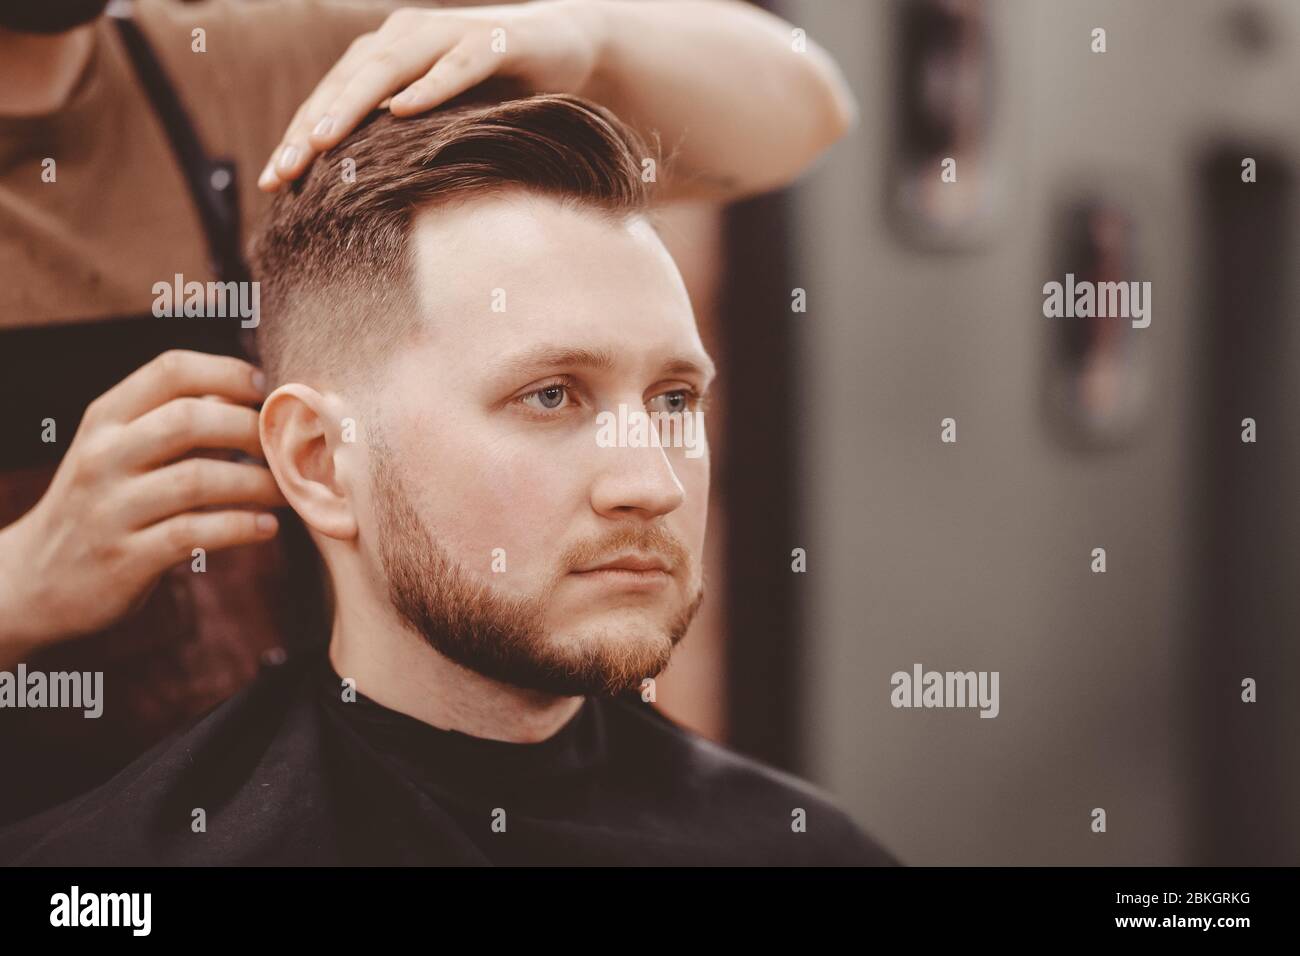 Barbershop banner. Man in barber chair, hairdresser styling his hair Stock  Photo - Alamy